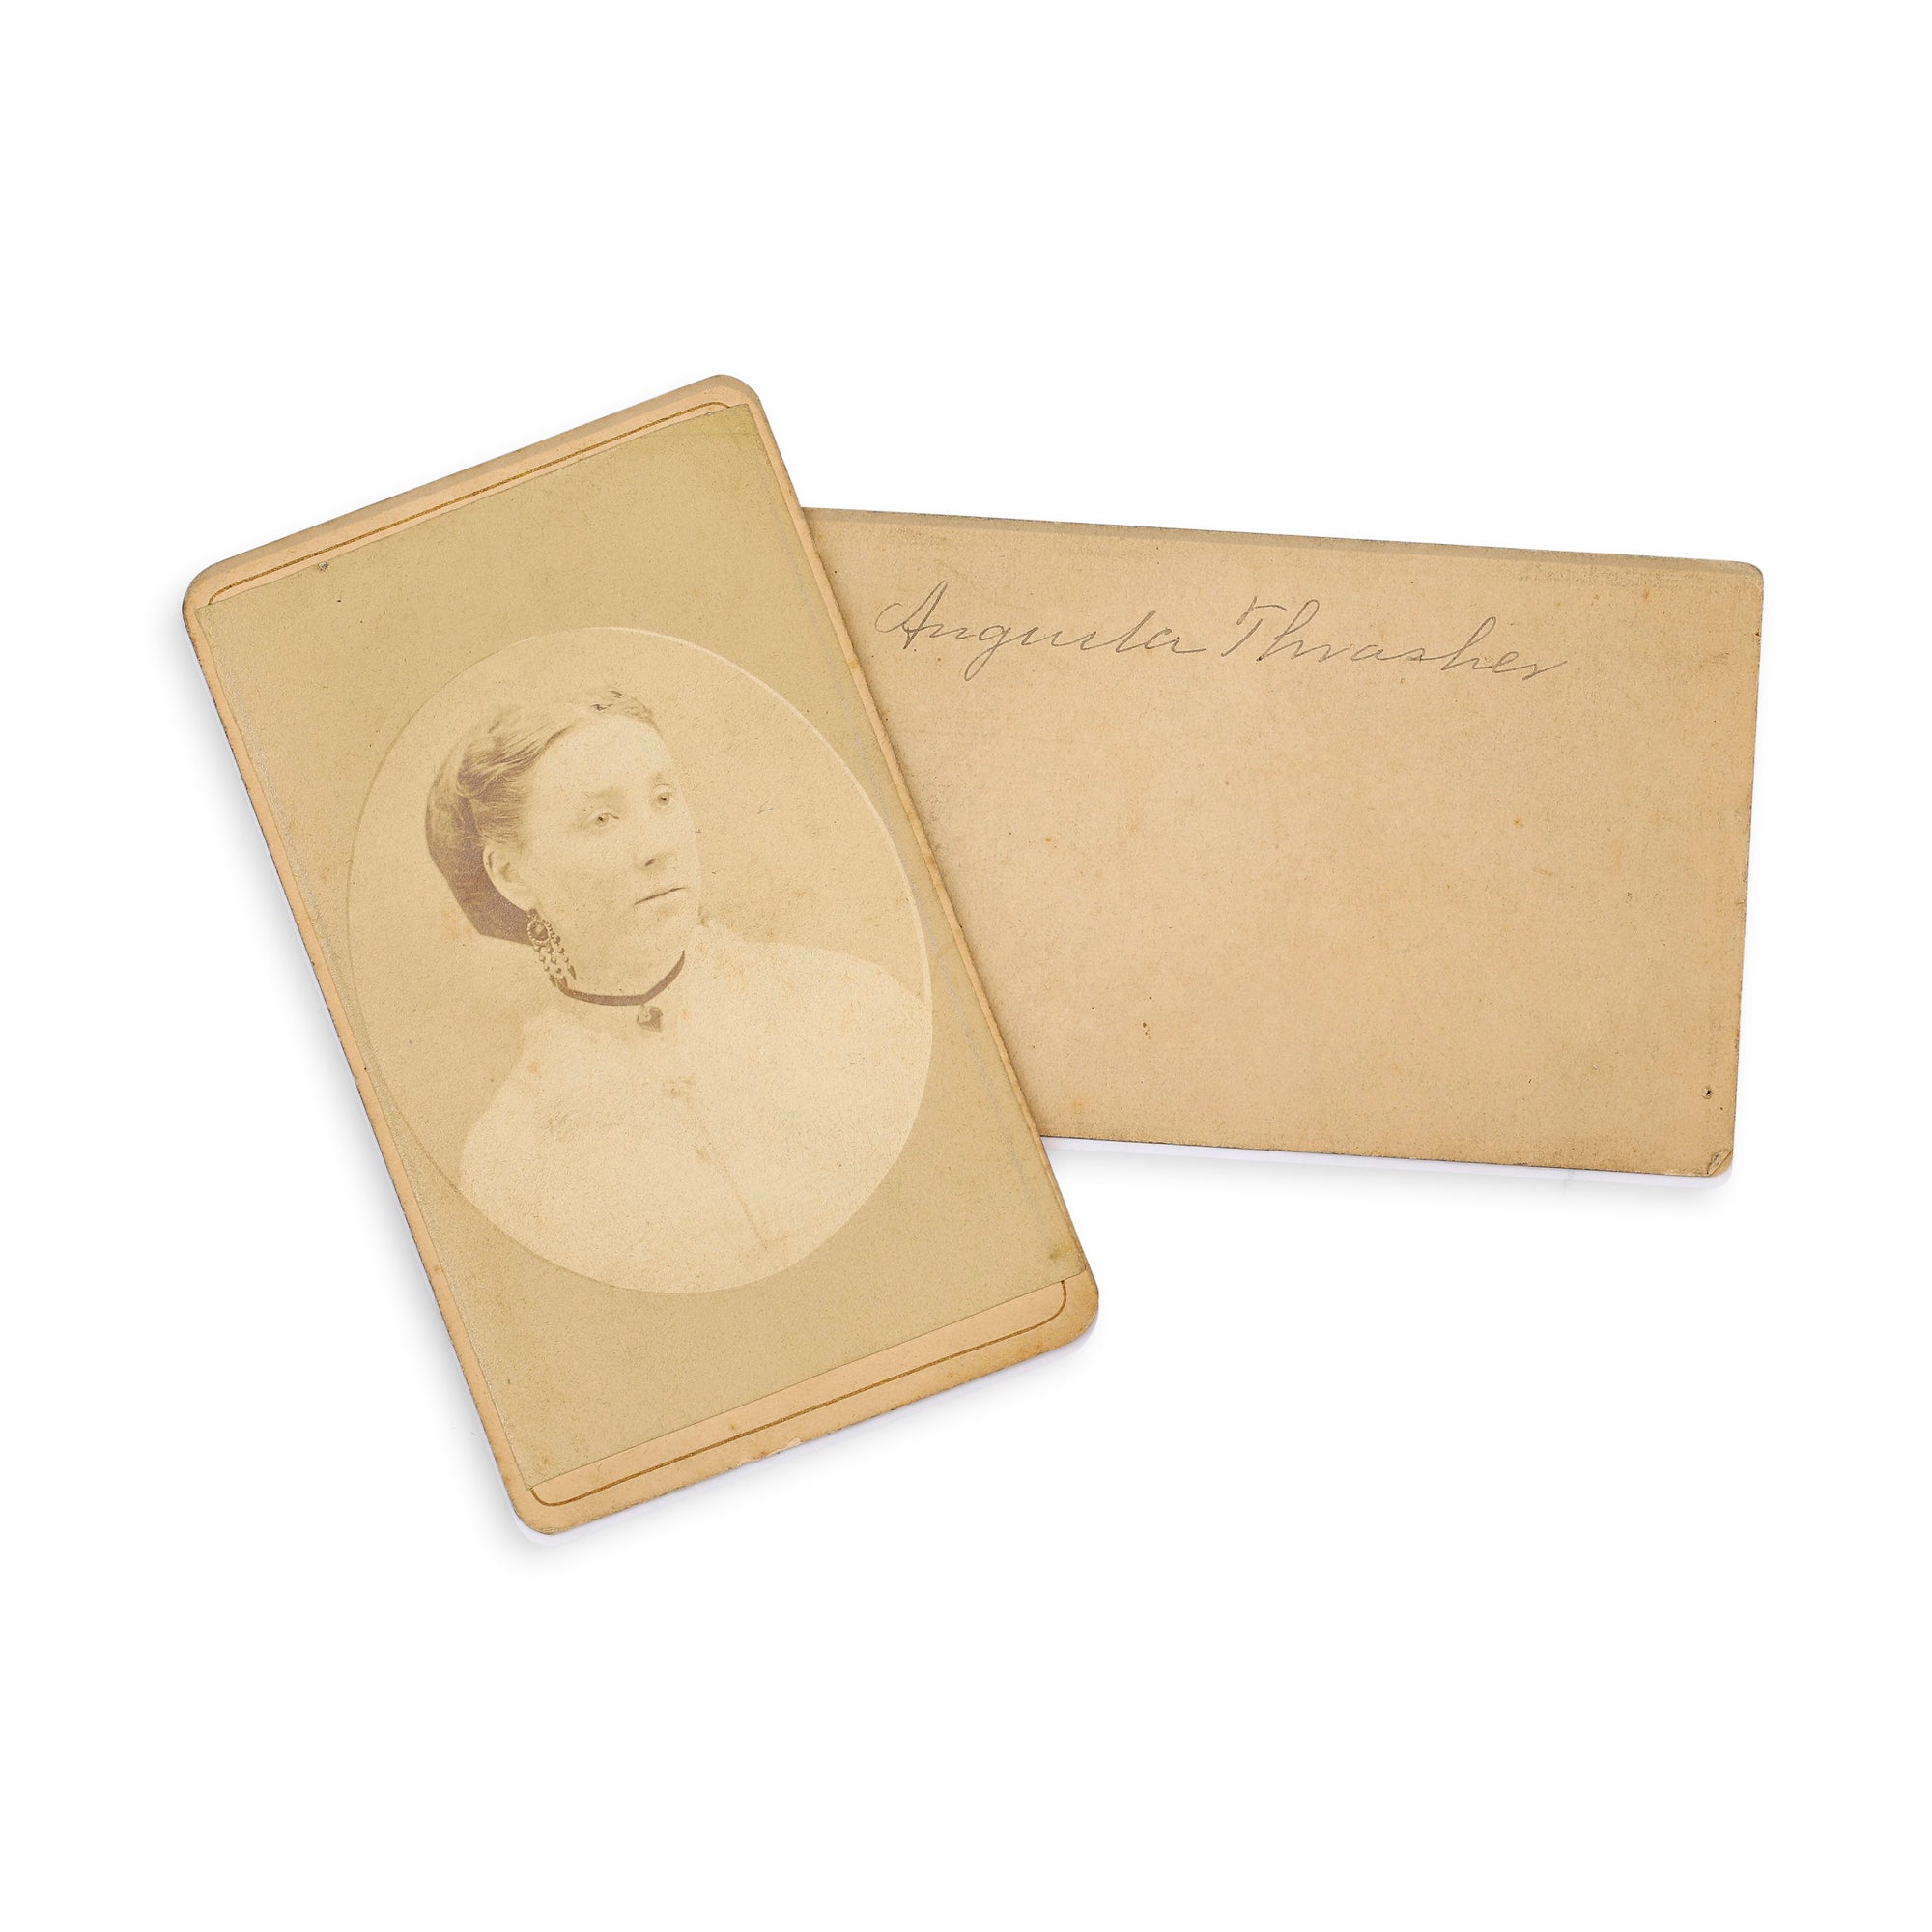 Victorian signed portraits of Augusta Thrasher.